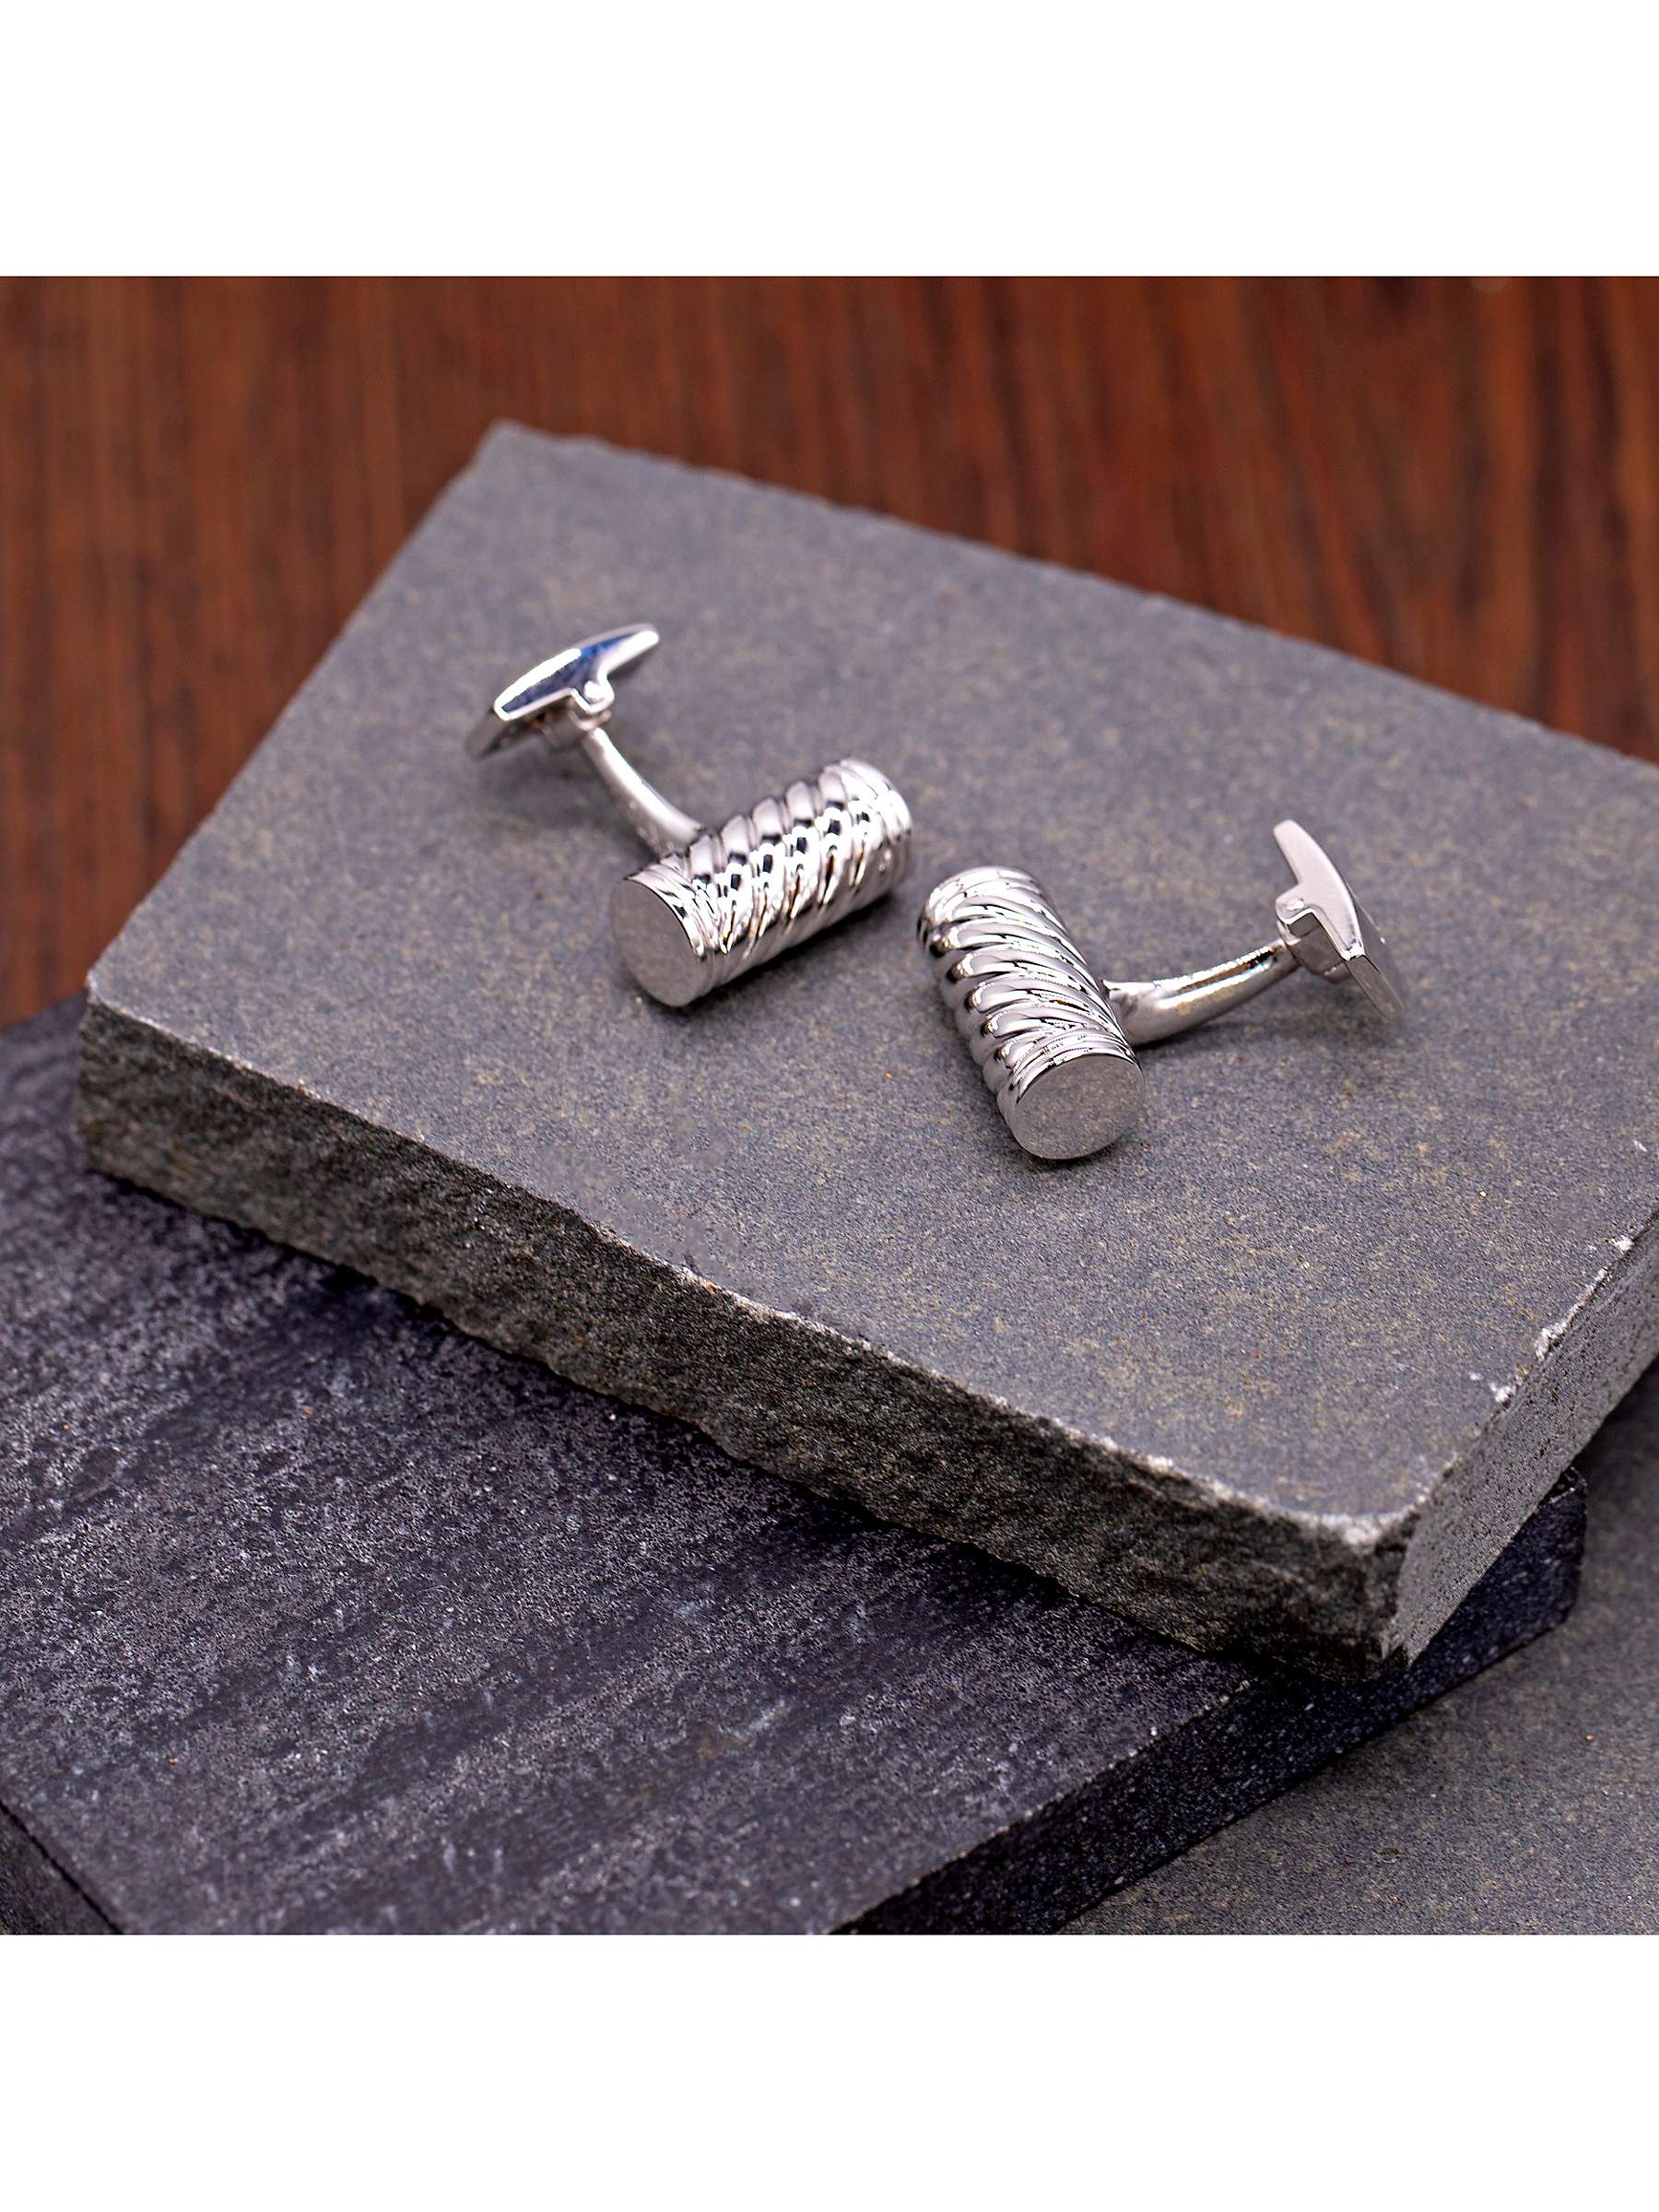 Buy Hoxton London Twist Cylindrical Cufflinks, Silver Online at johnlewis.com